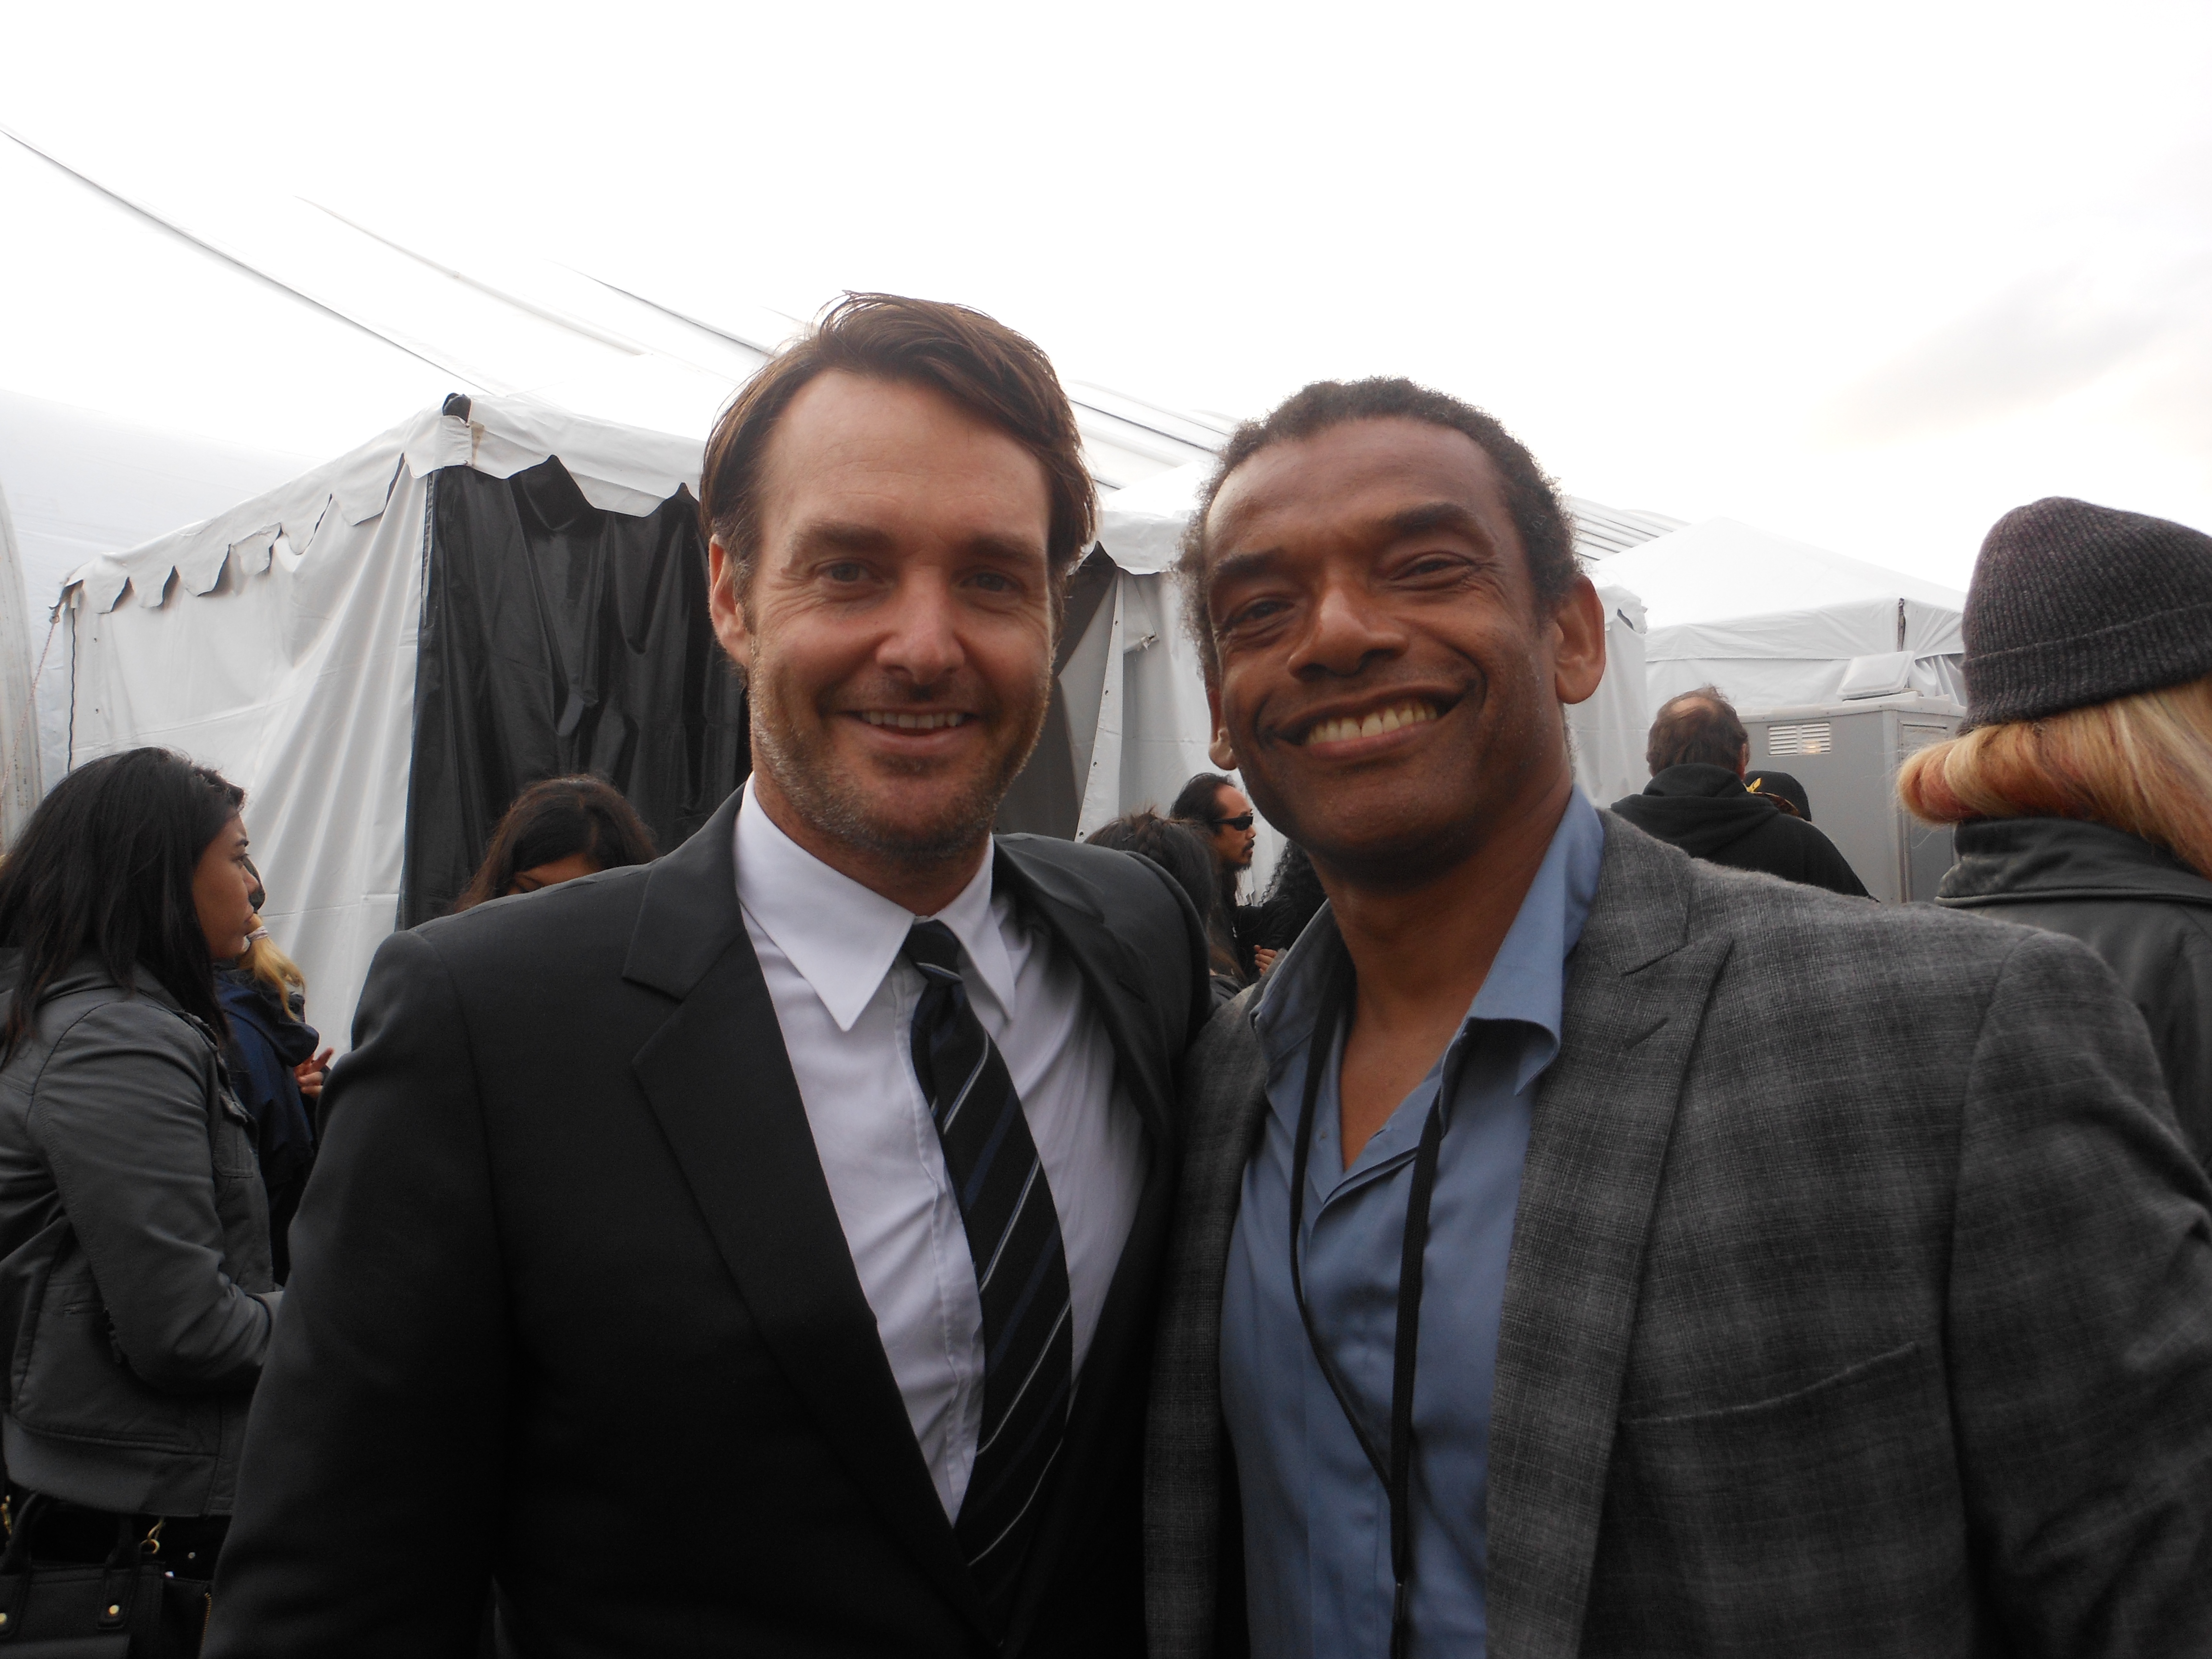 With the great Will Forte (Nebraska, Saturday Night Live)at the 2014 Independent Spirit Awards.